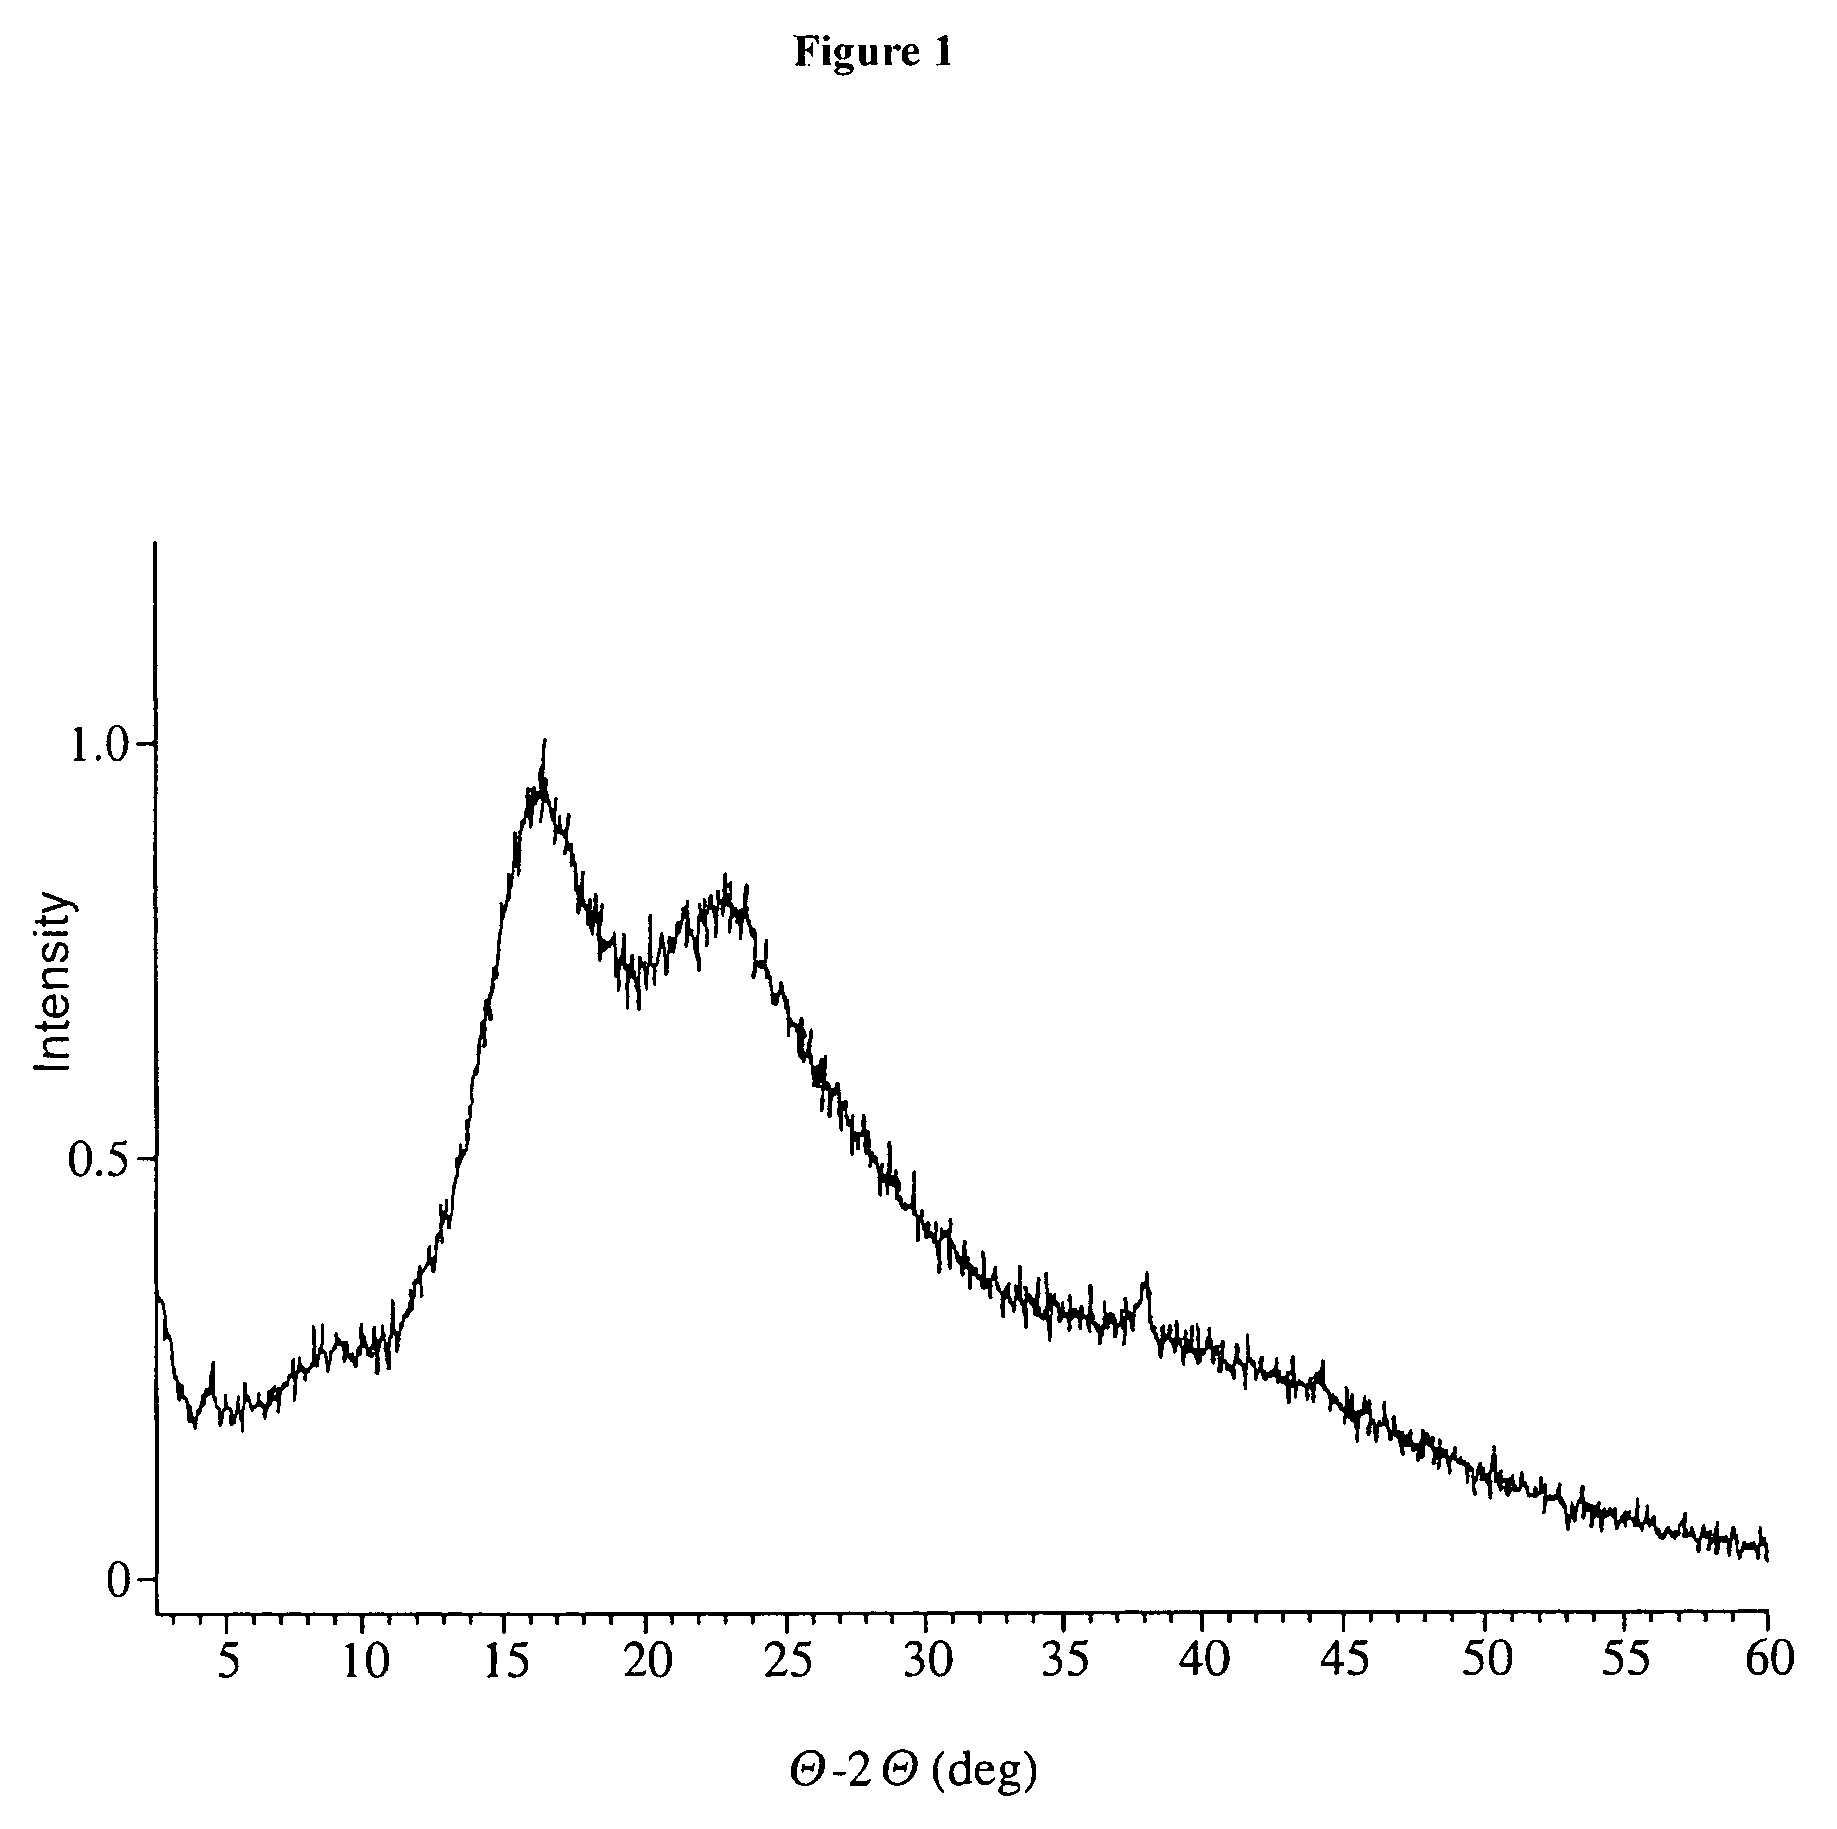 Ansamycin formulations and methods of use thereof